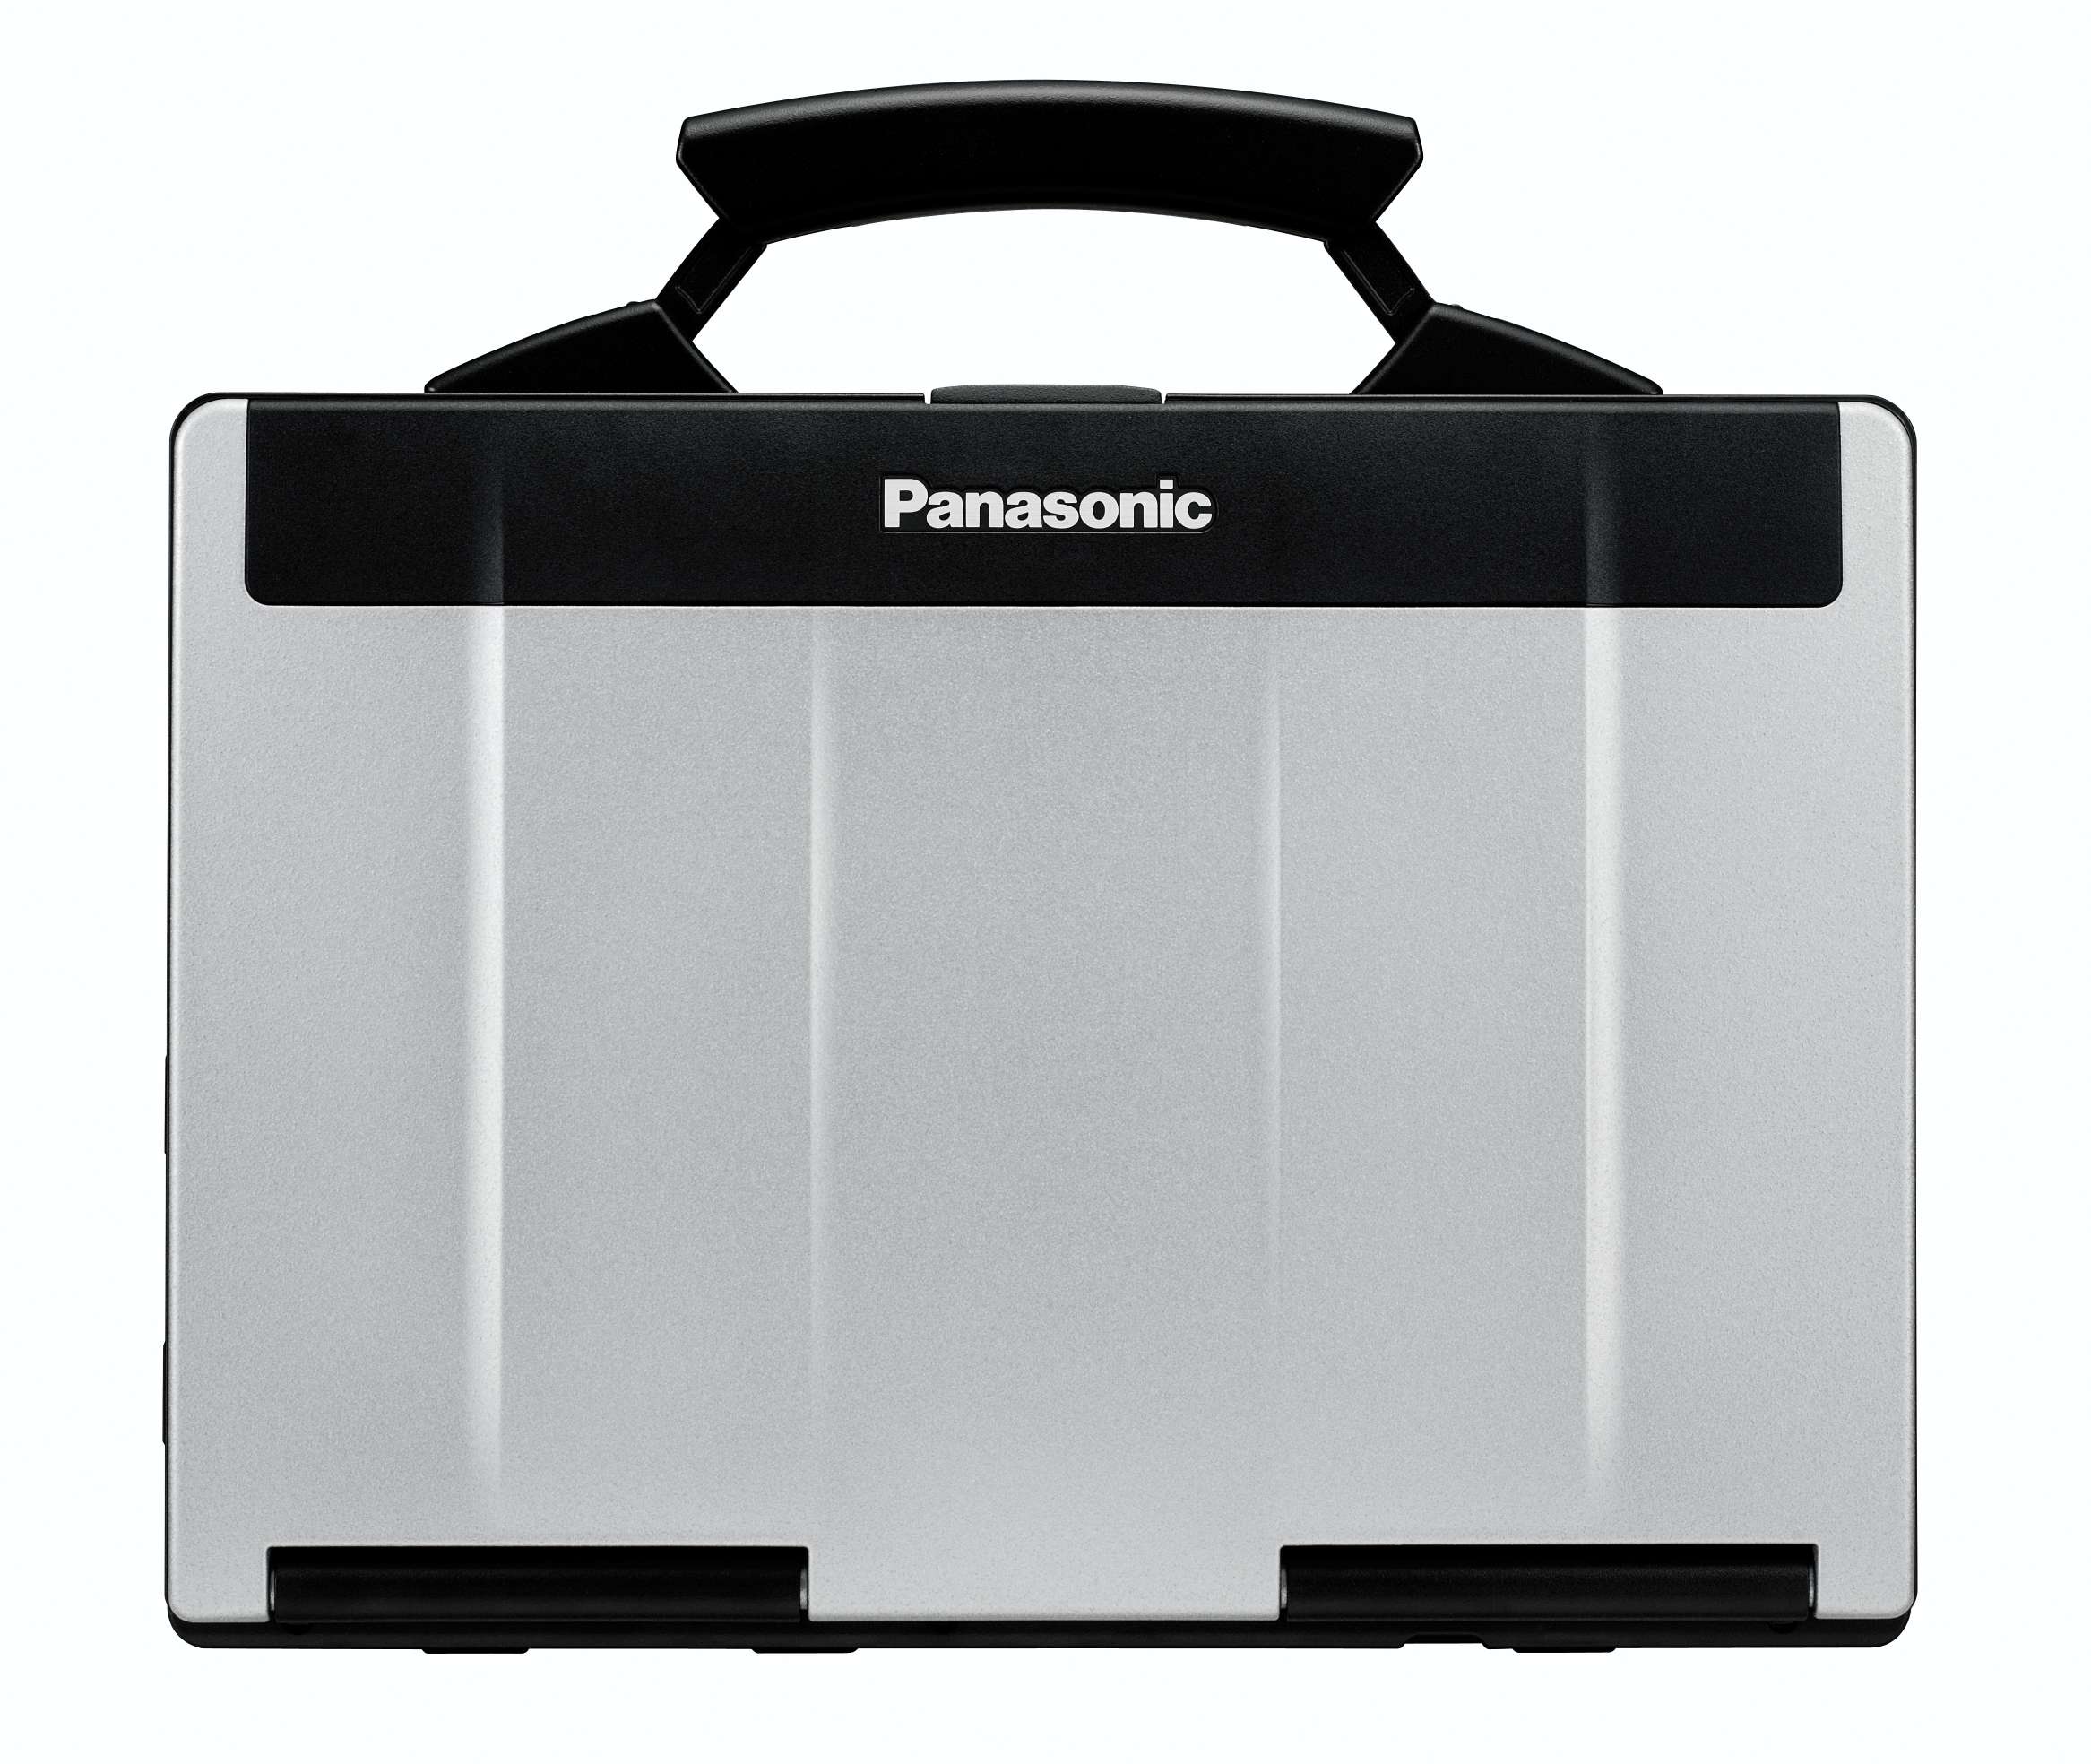 Used Panasonic A Grade CF-53 Toughbook 14-inch (High Definition-720p LED 1366 x 768) 2.5GHz Core i5 320GB HD 4 GB Memory CD Drive Win 7 Pro OS Power Adapter Included - image 3 of 3